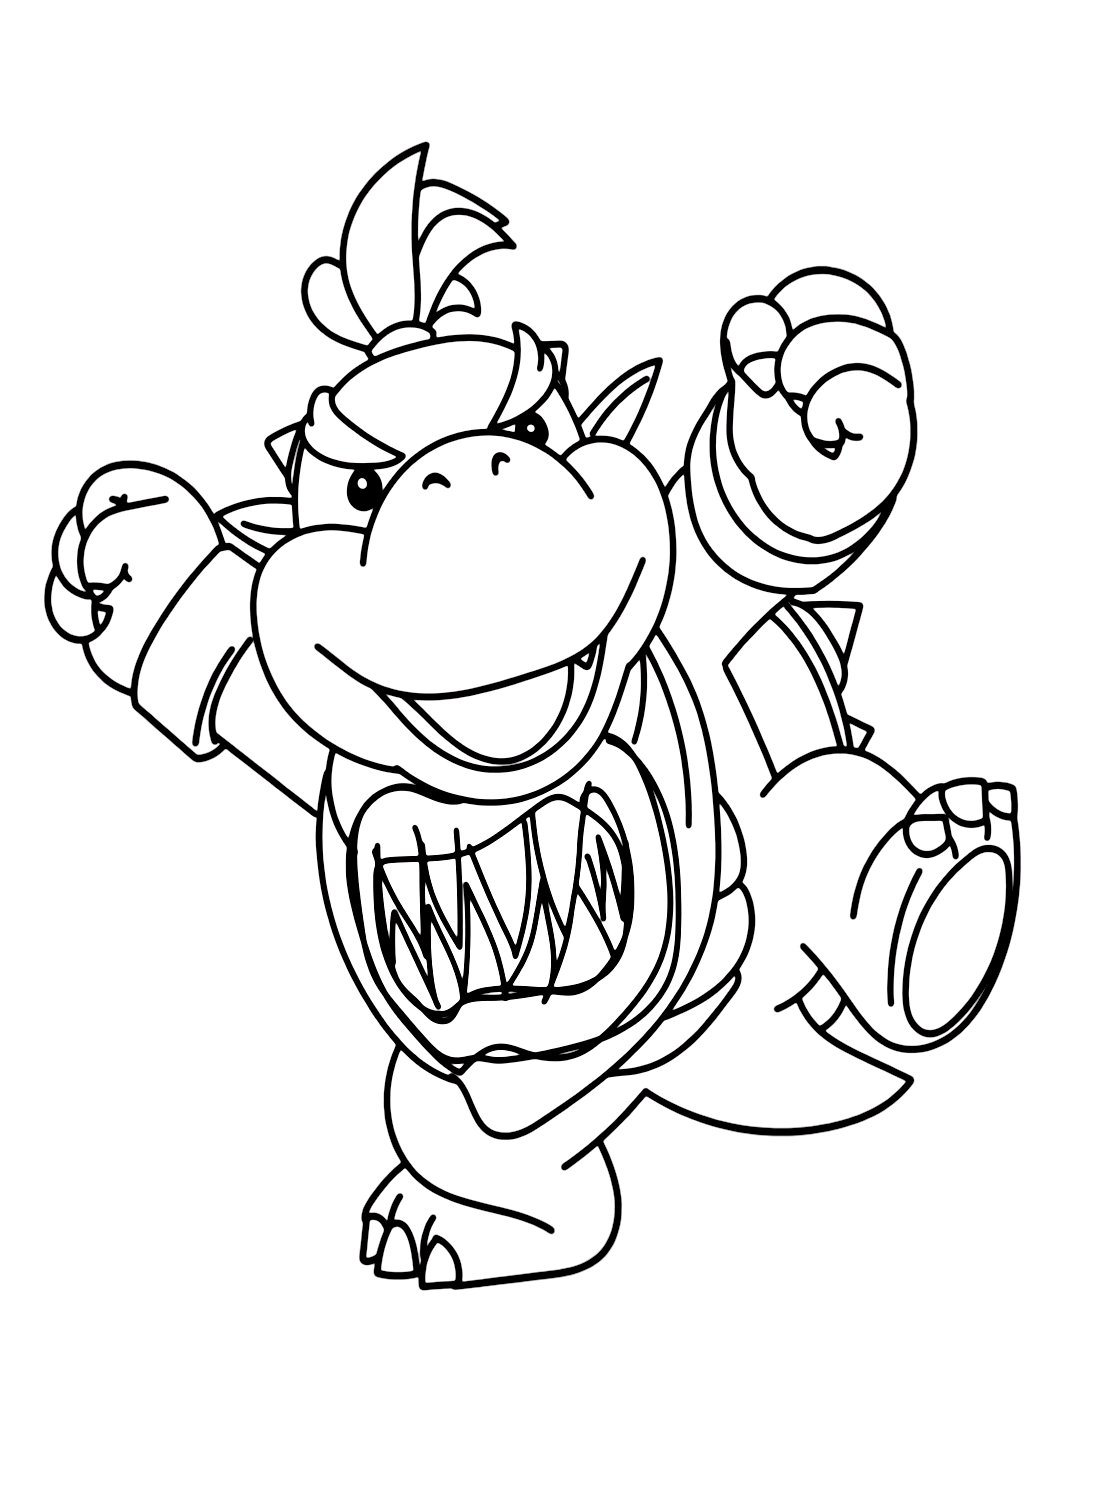 Bowser Jr. from Super Mario Coloring Page Free Printable Coloring Pages